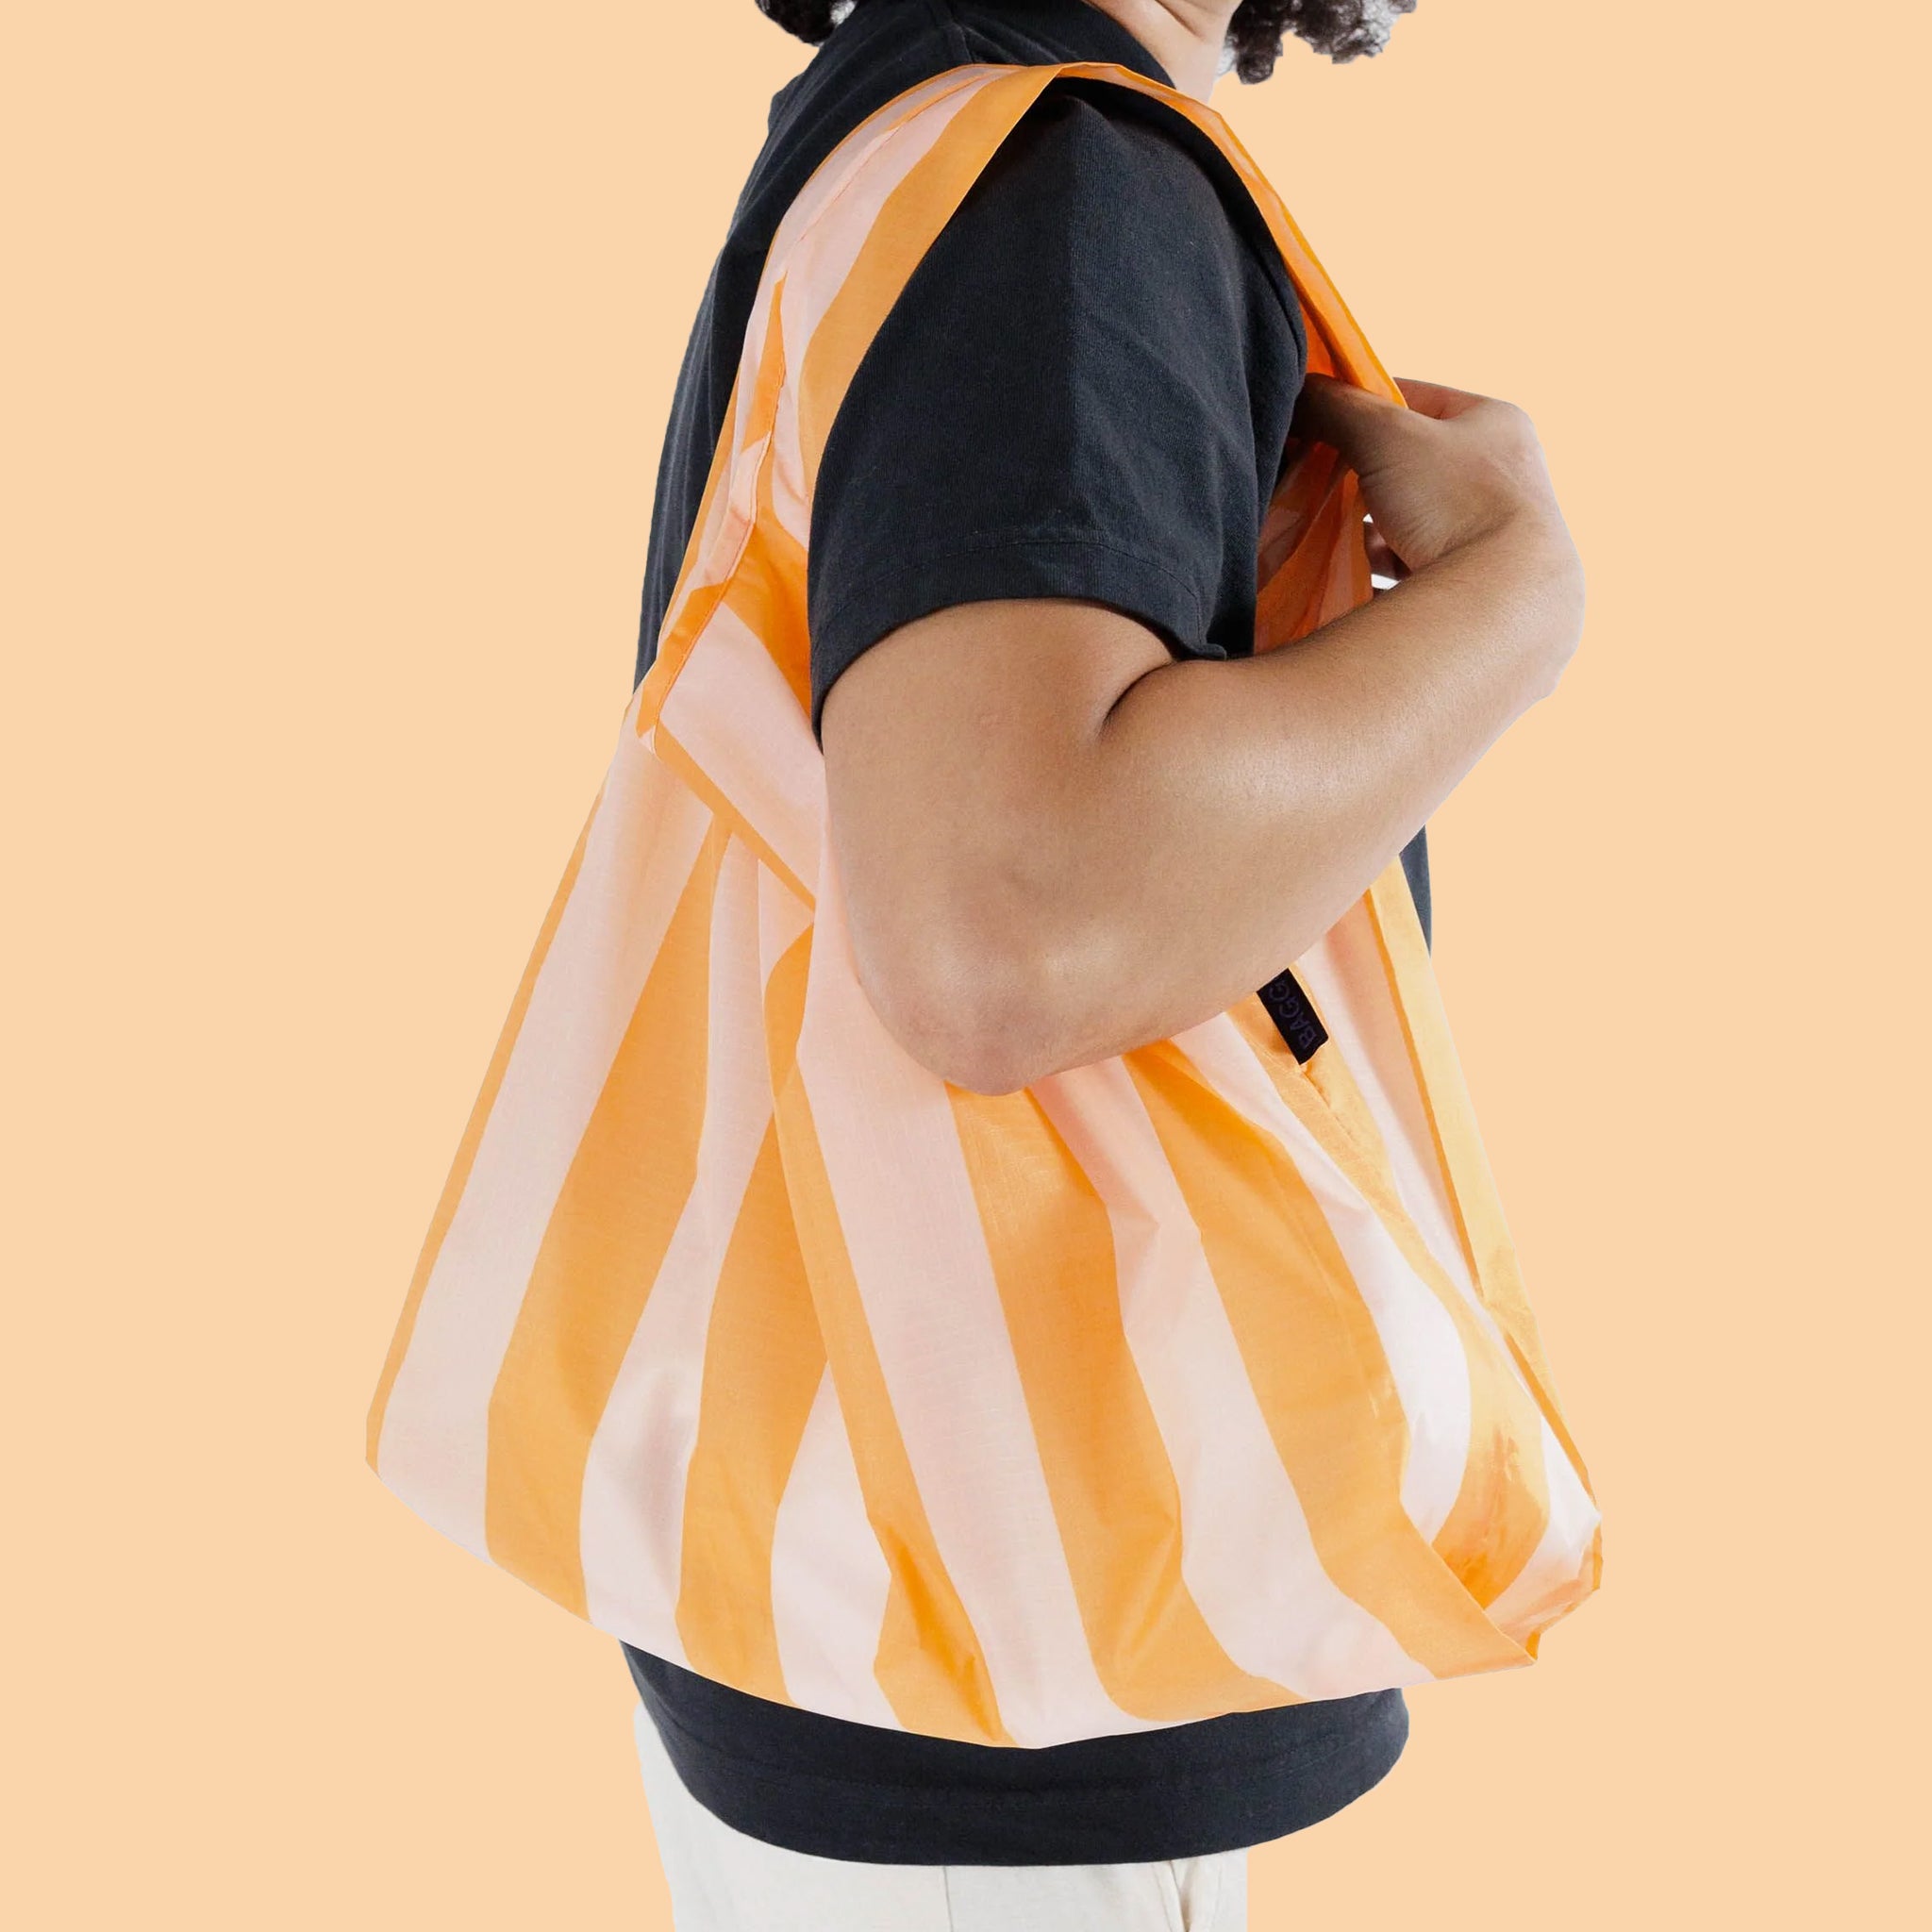 A nylon reusable bag with tangerine wide stripes.